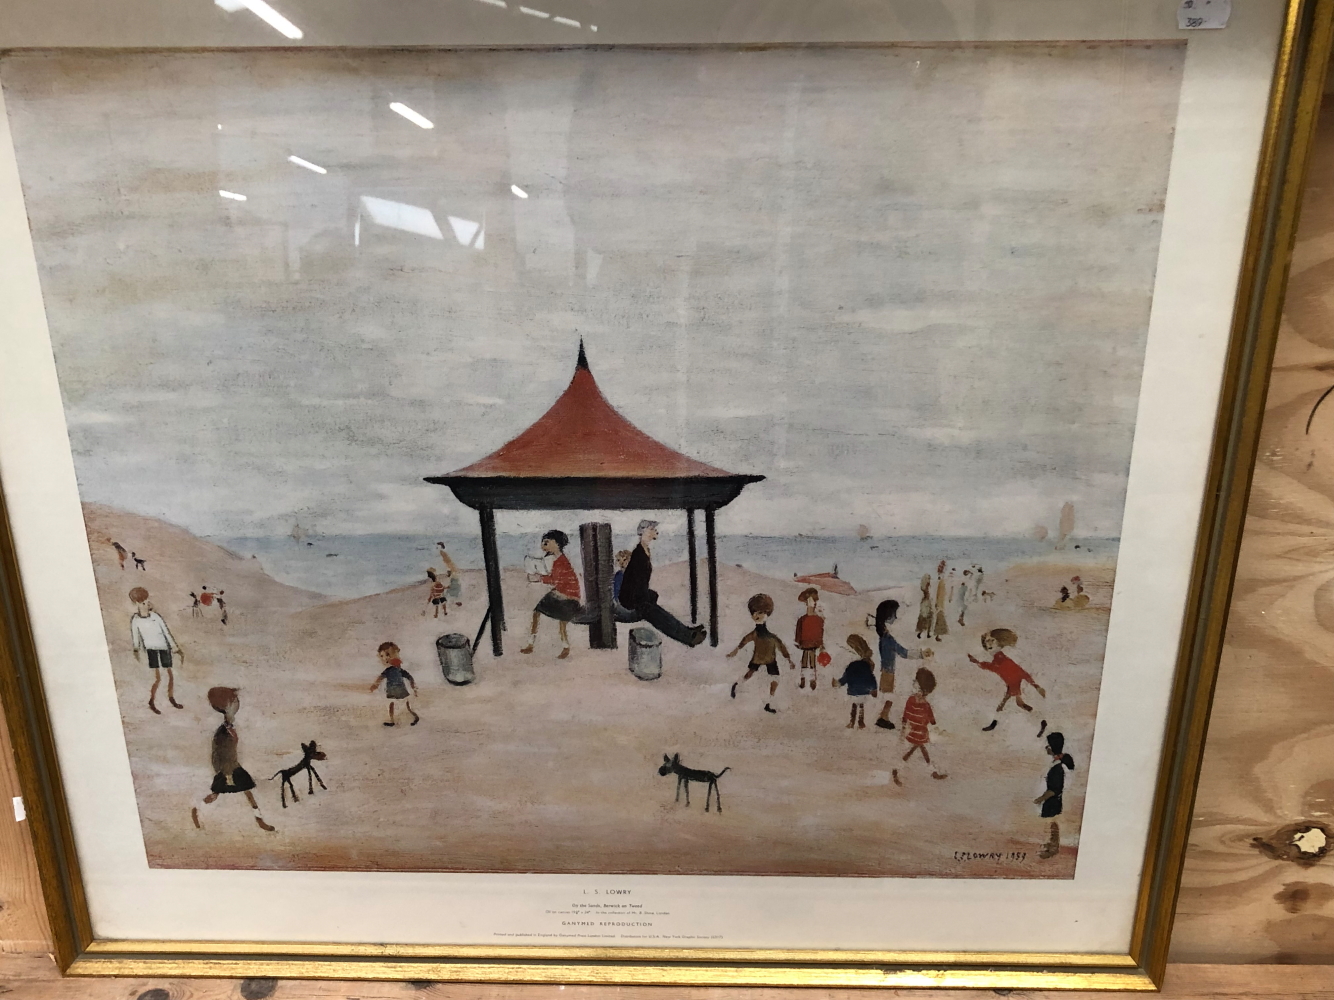 VARIOUS FURNISHING PICTURES OF COLONIAL SCENES TOGETHER WITH PRINTS AFTER LOWRY, ETC. SIZES VARY. - Image 8 of 9